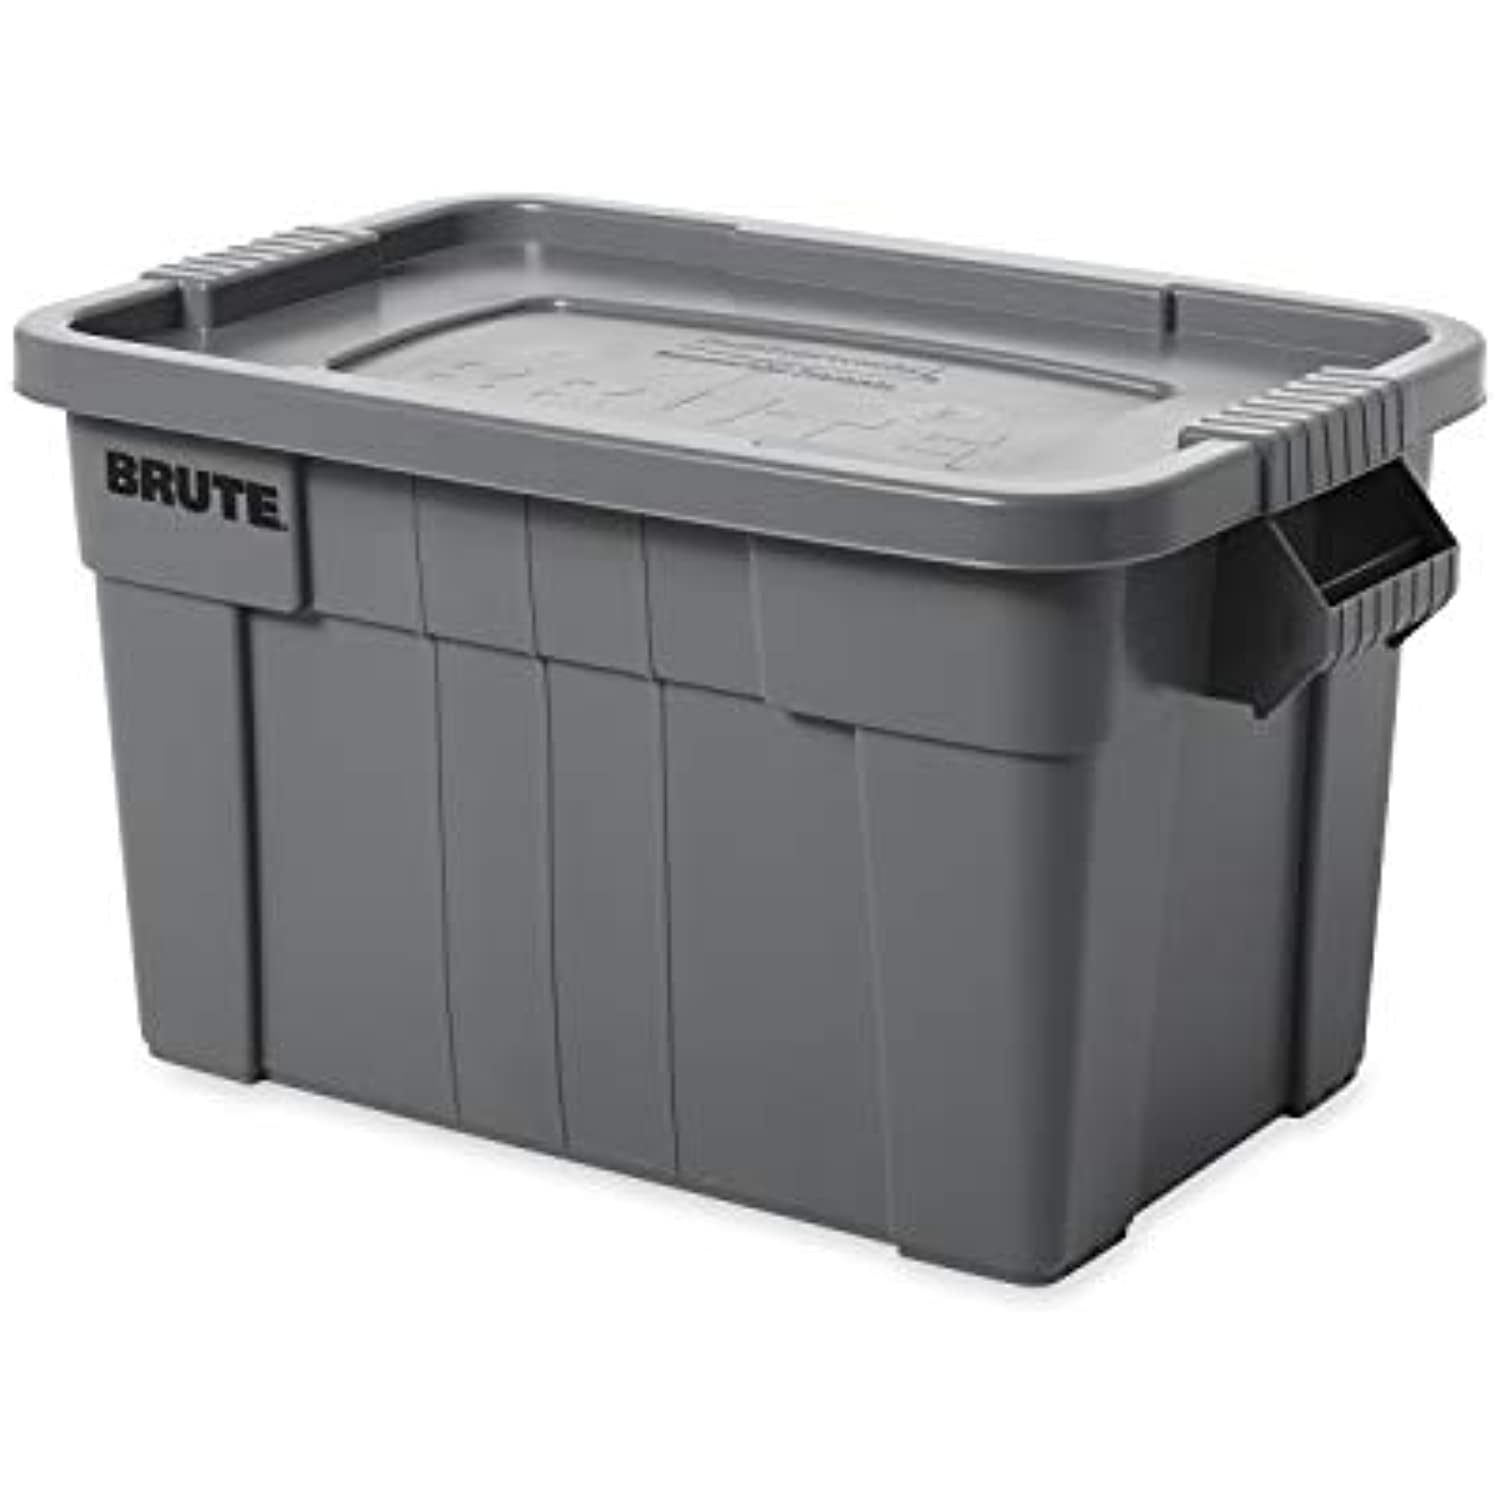 Rubbermaid Commercial Products Brute Tote Storage Container with Lid, 20- Gallon, Gray (FG9S3100GRAY)